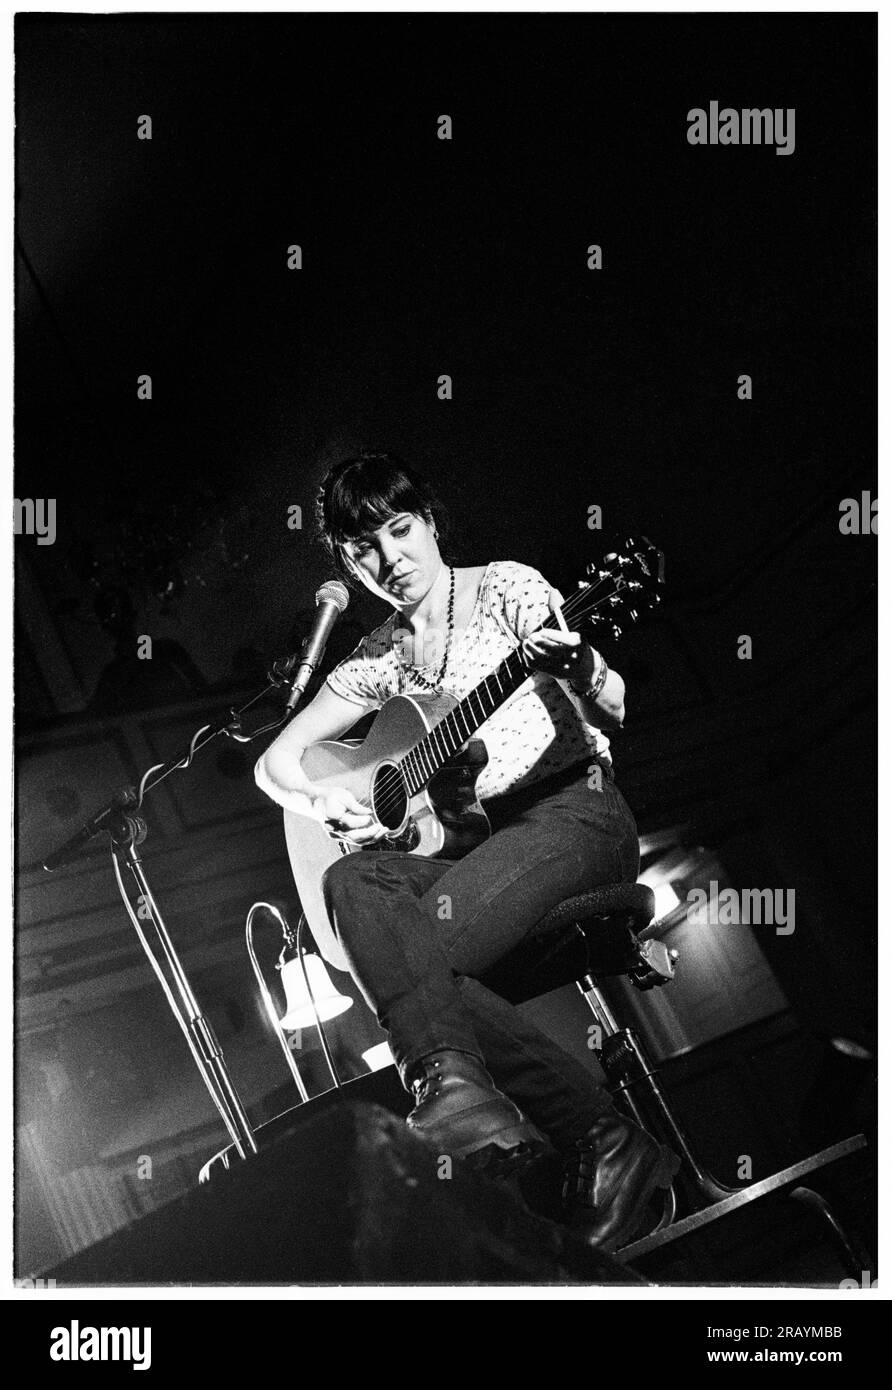 KRISTIN HERSH, BRISTOL, 1994: Kristin Hersh of Throwing Muses playing a live acoustic concert at Bristol St George’s Hall on 24 March 1994. Photograph: Rob Watkins. INFO: Kristin Hersh, an American singer-songwriter, is known for her influential role in alternative rock. As the frontwoman of Throwing Muses, her distinctive voice and poetic songwriting, showcased in solo works like "Hips and Makers," have left an enduring impact on the alternative and indie music landscapes. Stock Photo